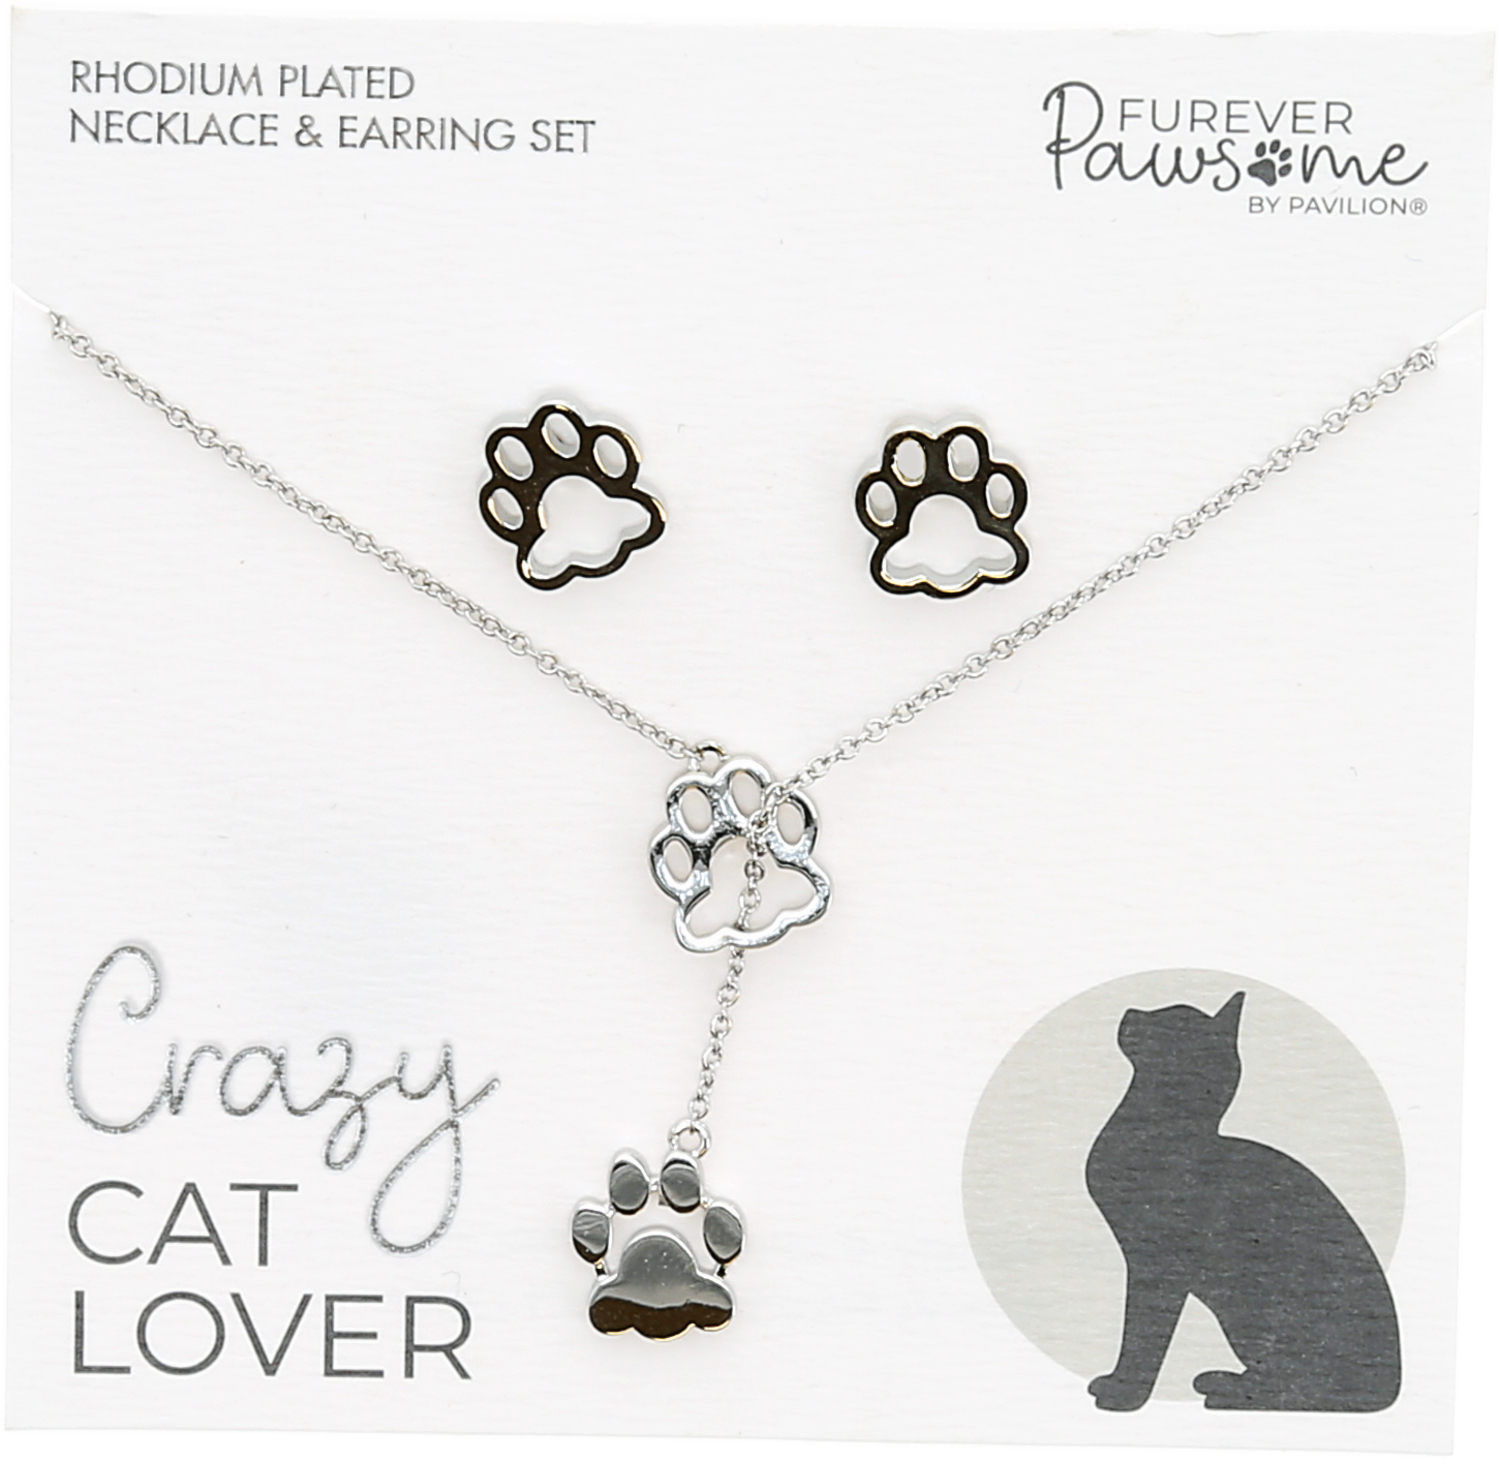 Cat Lover by Furever Pawsome - Cat Lover - Rhodium Plated Adjustable Necklace and Earring Set